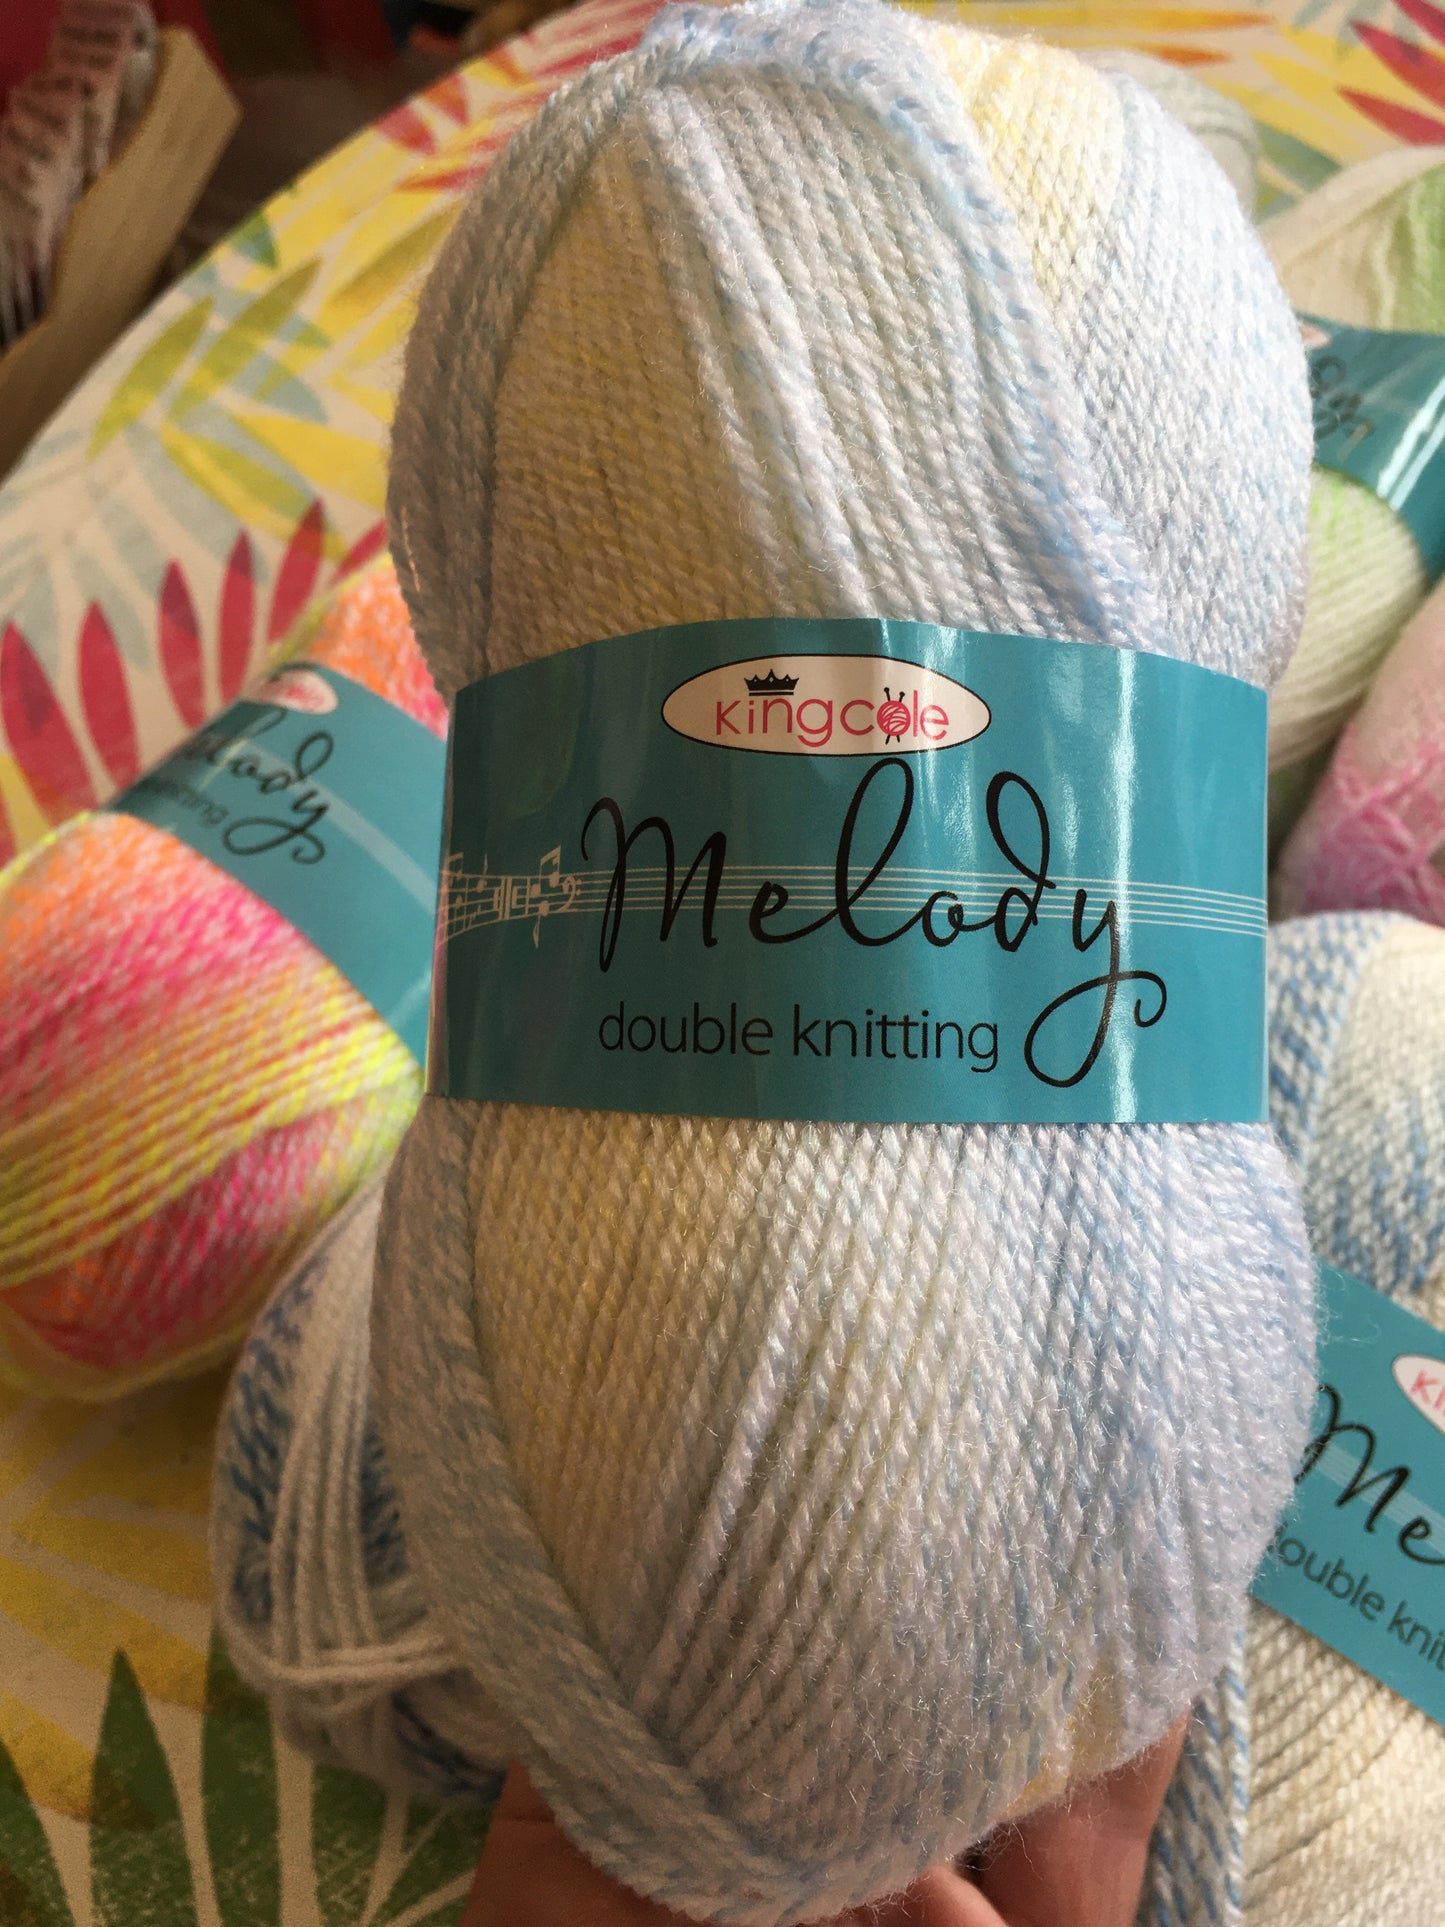 King Cole Melody Dk 3362 Periwinkle